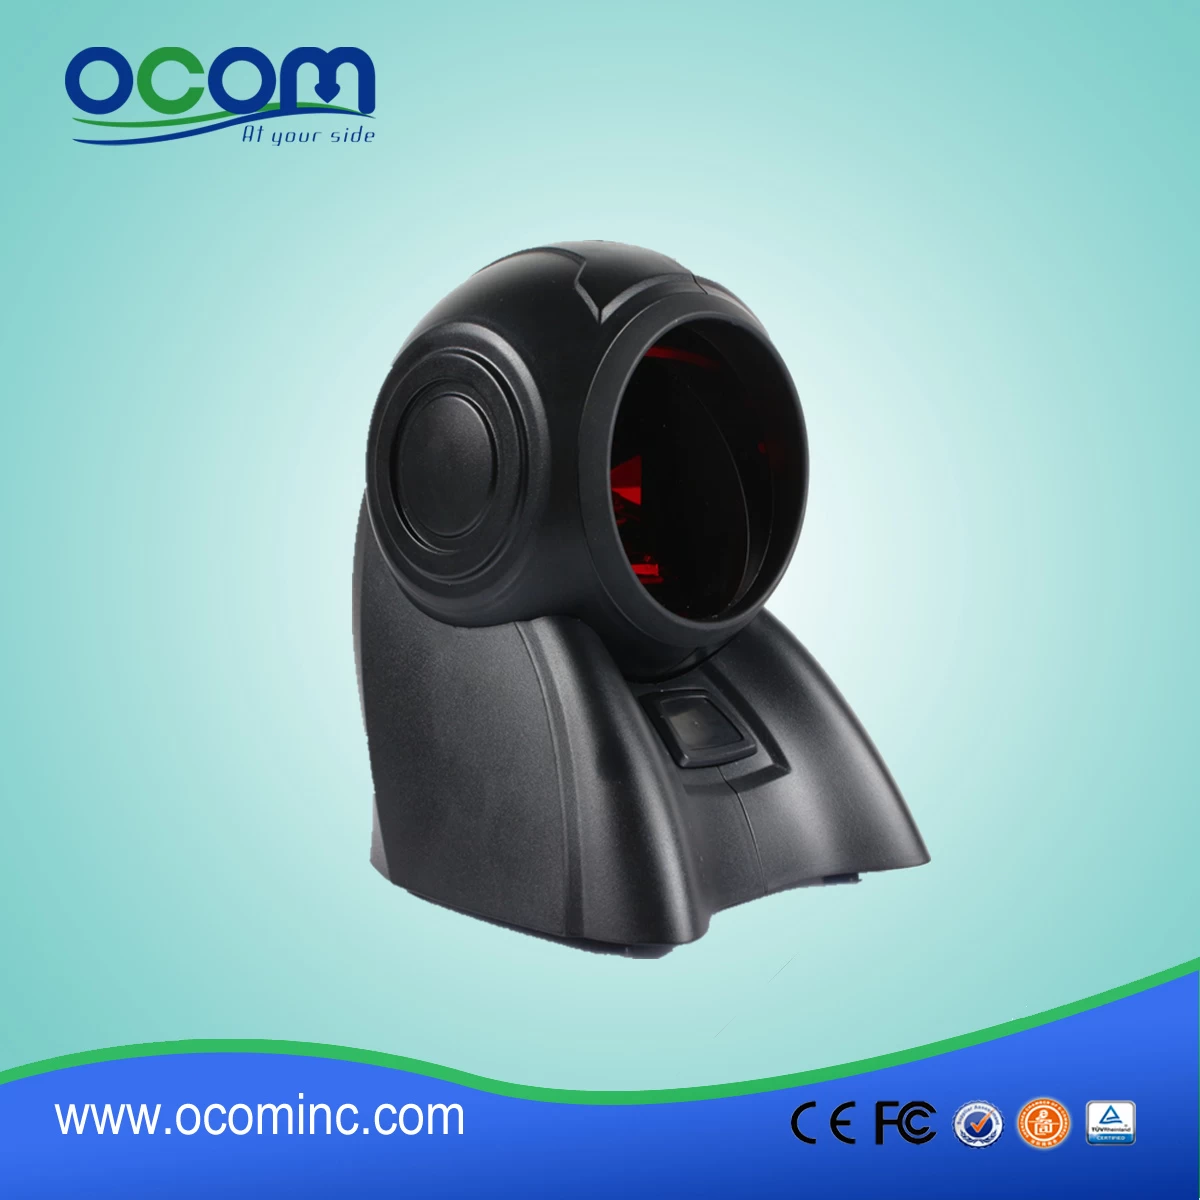 Low Cost 1D Omni-directional Barcode Scanner OCBS-T009